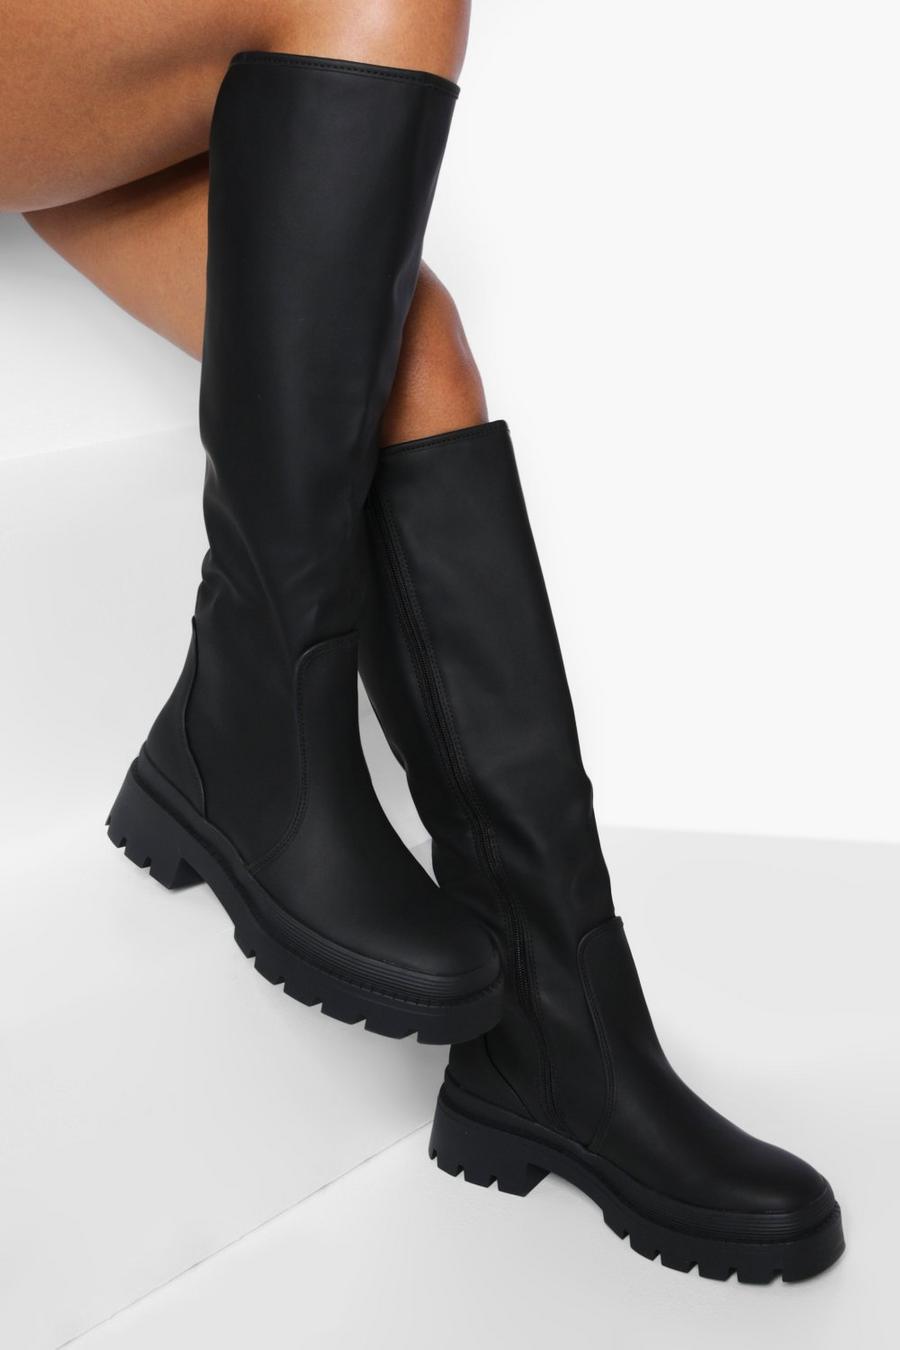 Black negro Rubber Knee High Boots